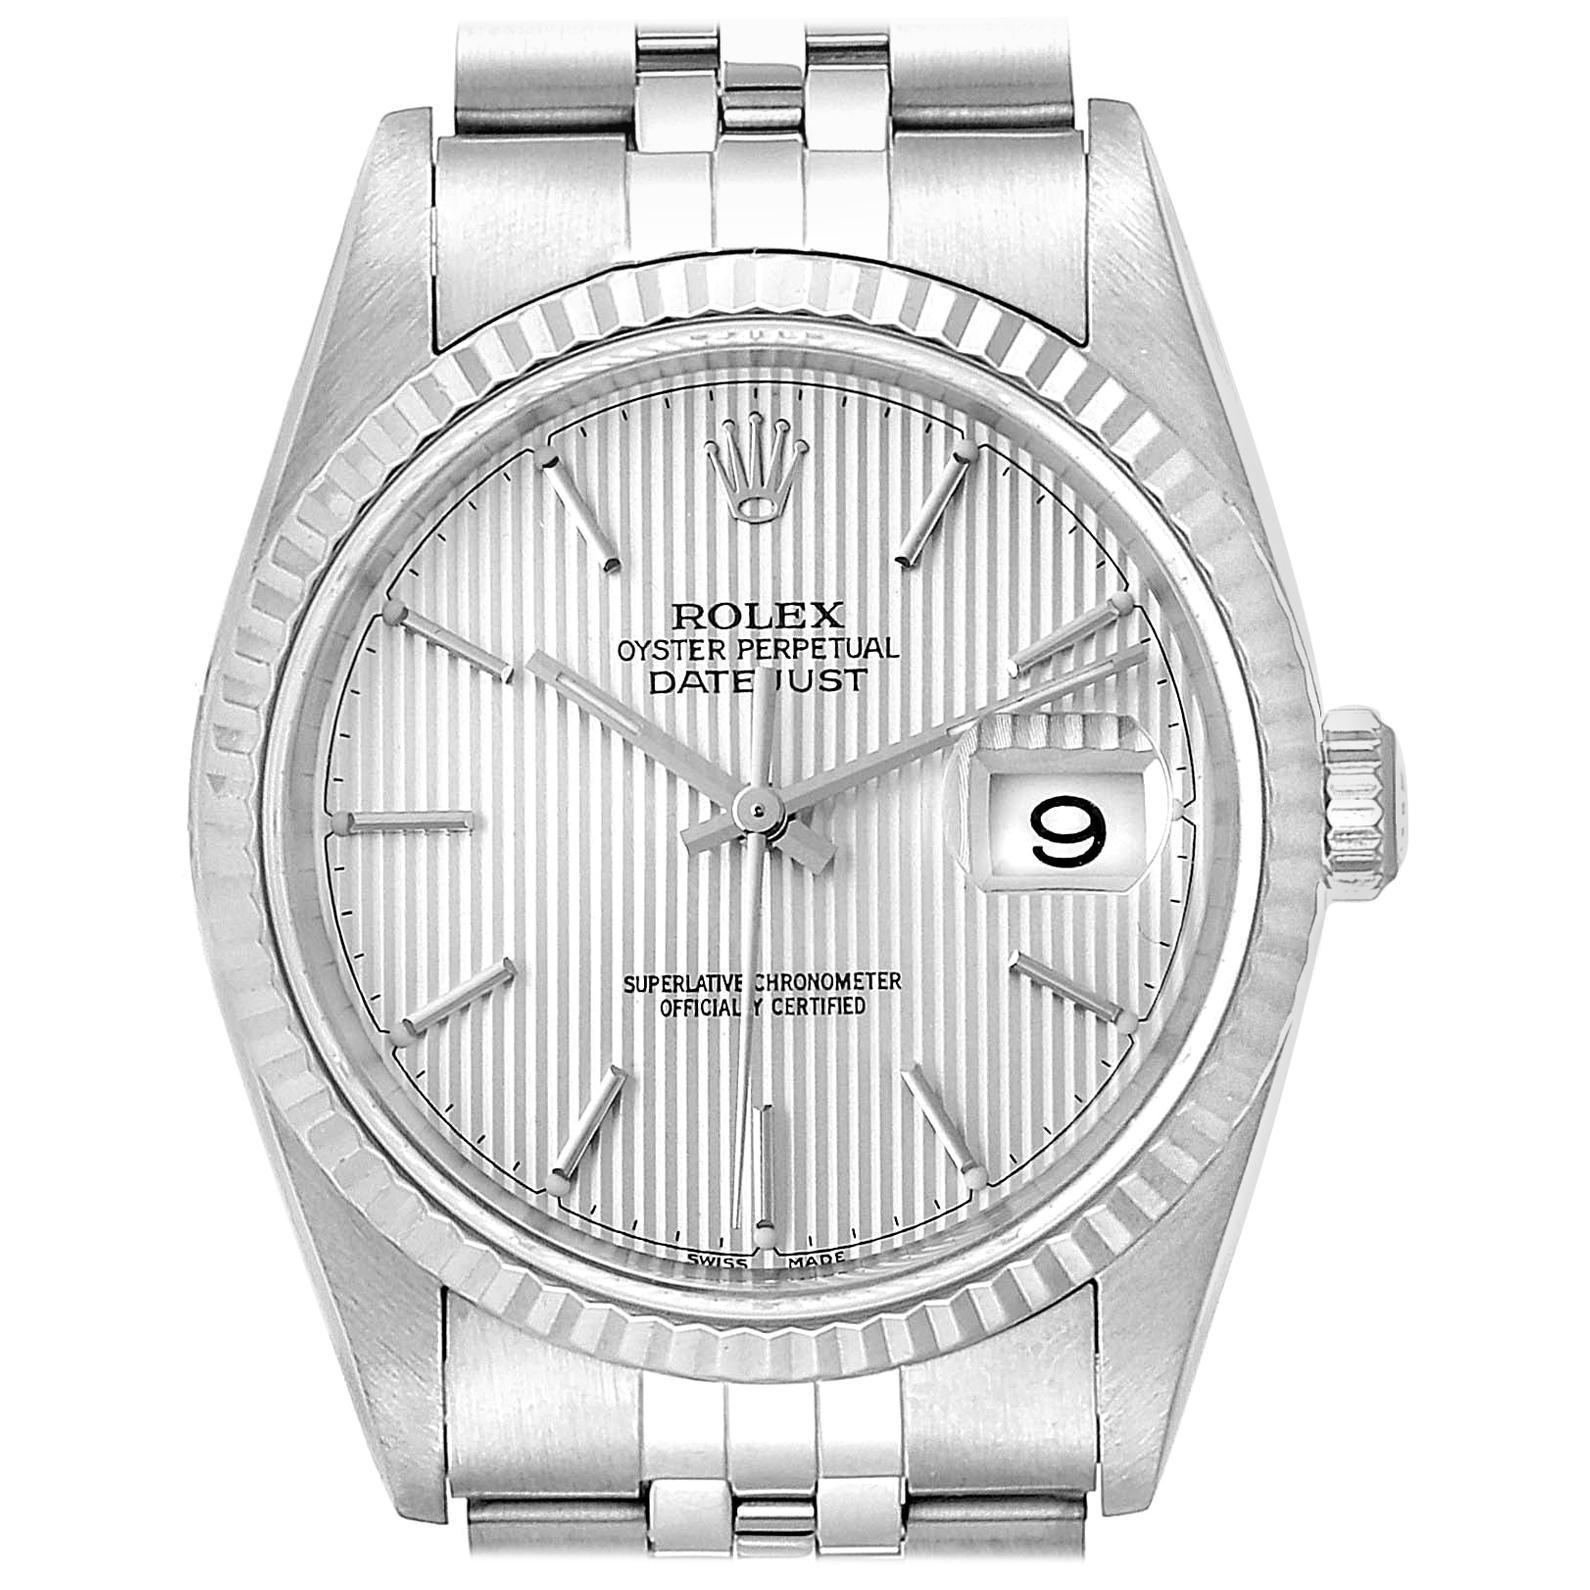 Rolex Datejust 36 Steel White Gold Tapestry Dial Men’s Watch 16234